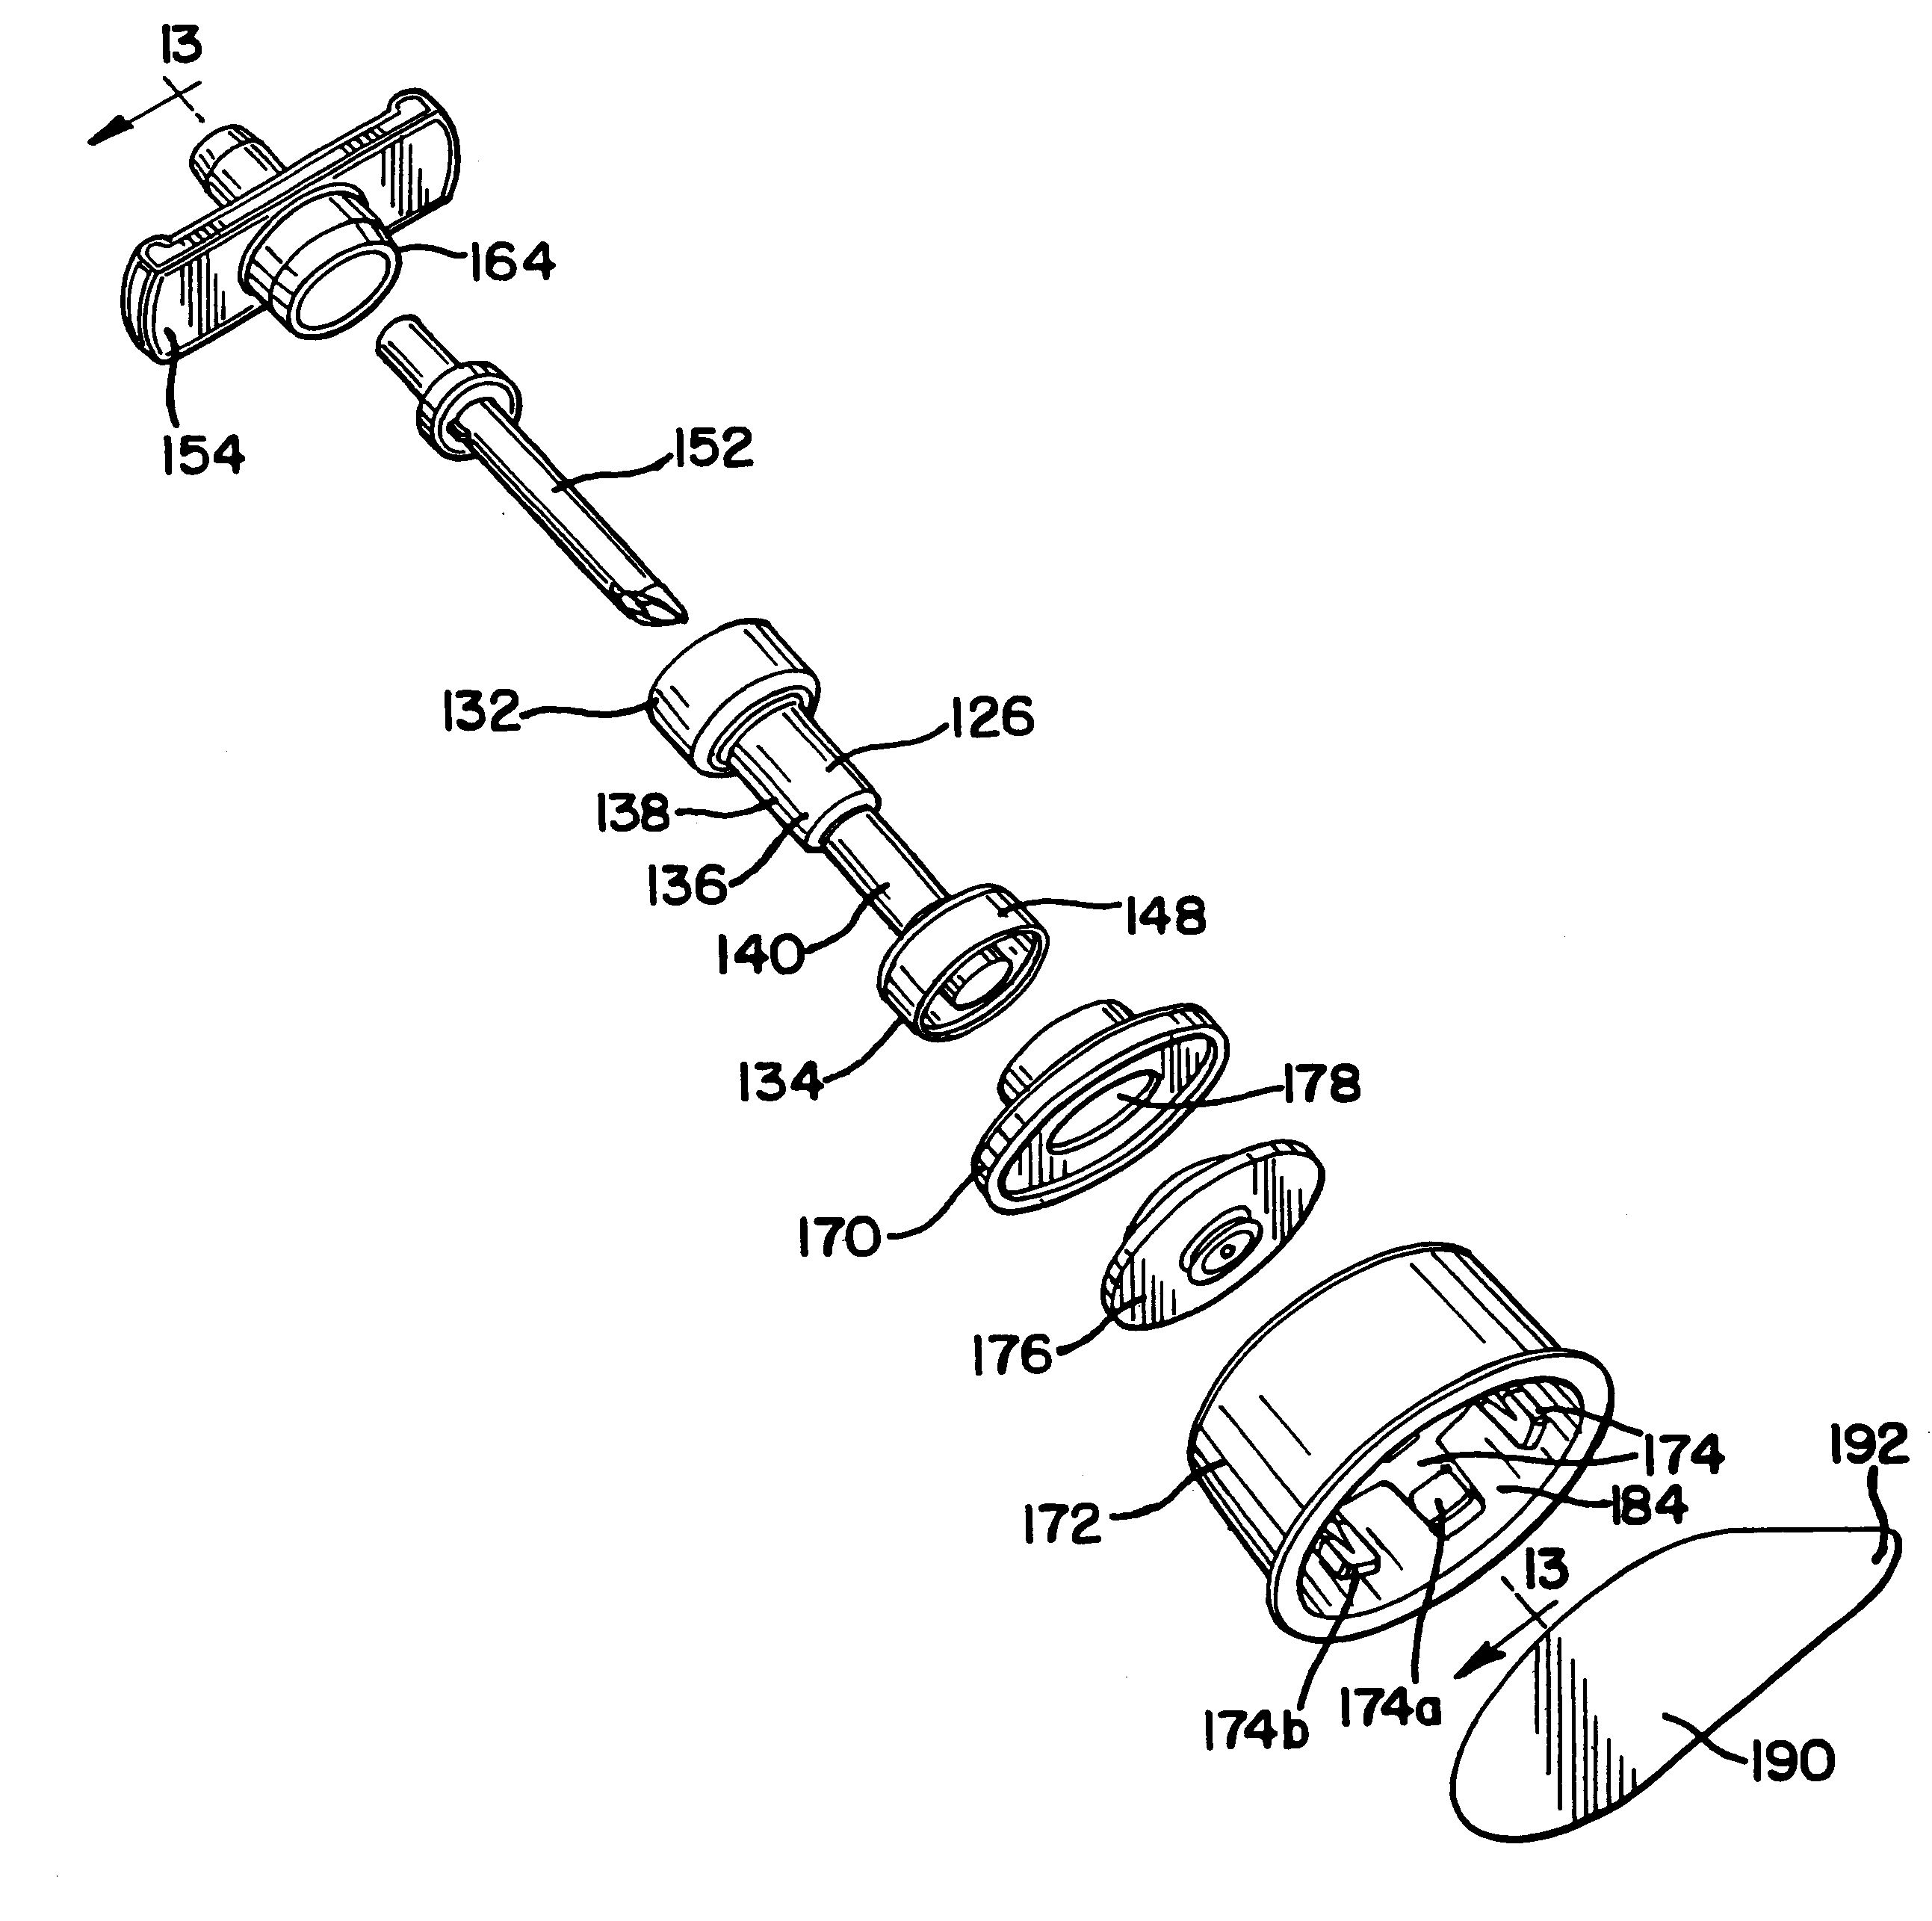 Vial connecting device for a sliding reconstitution device for a diluent container